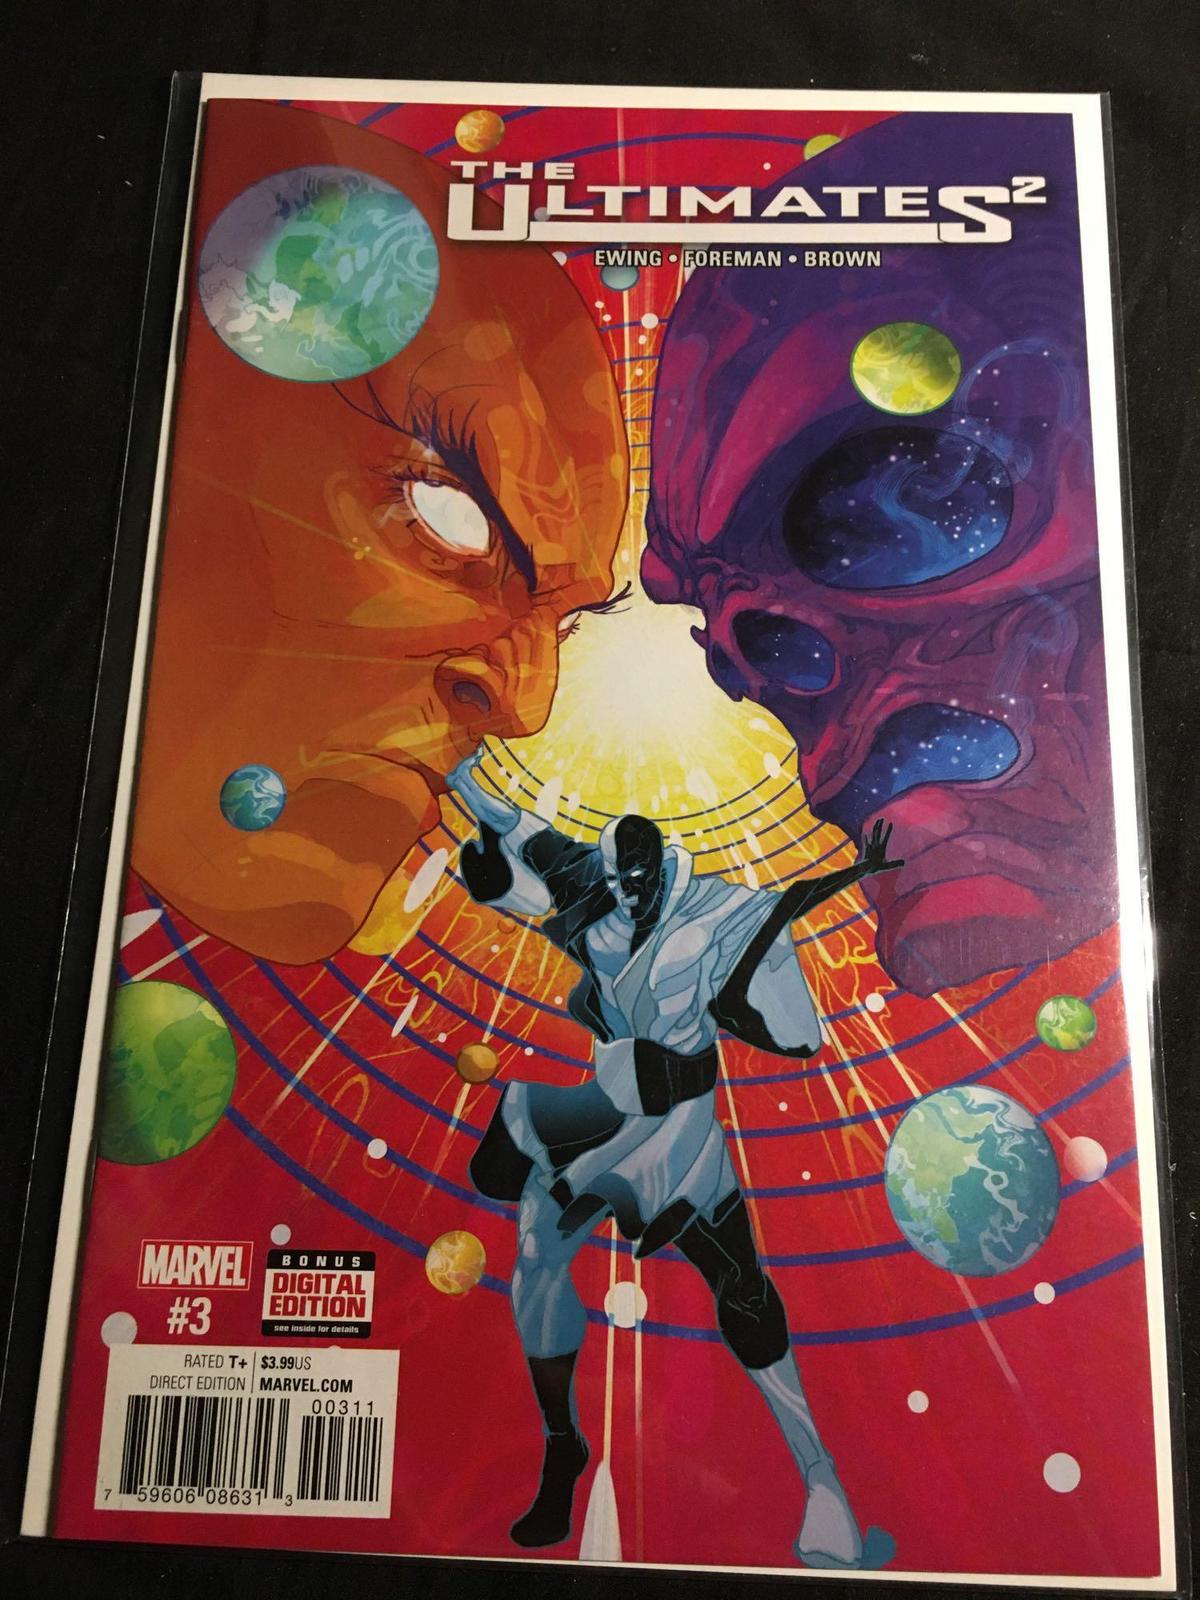 The Ultimates 2 #3 Comic Book from Amazing Collection